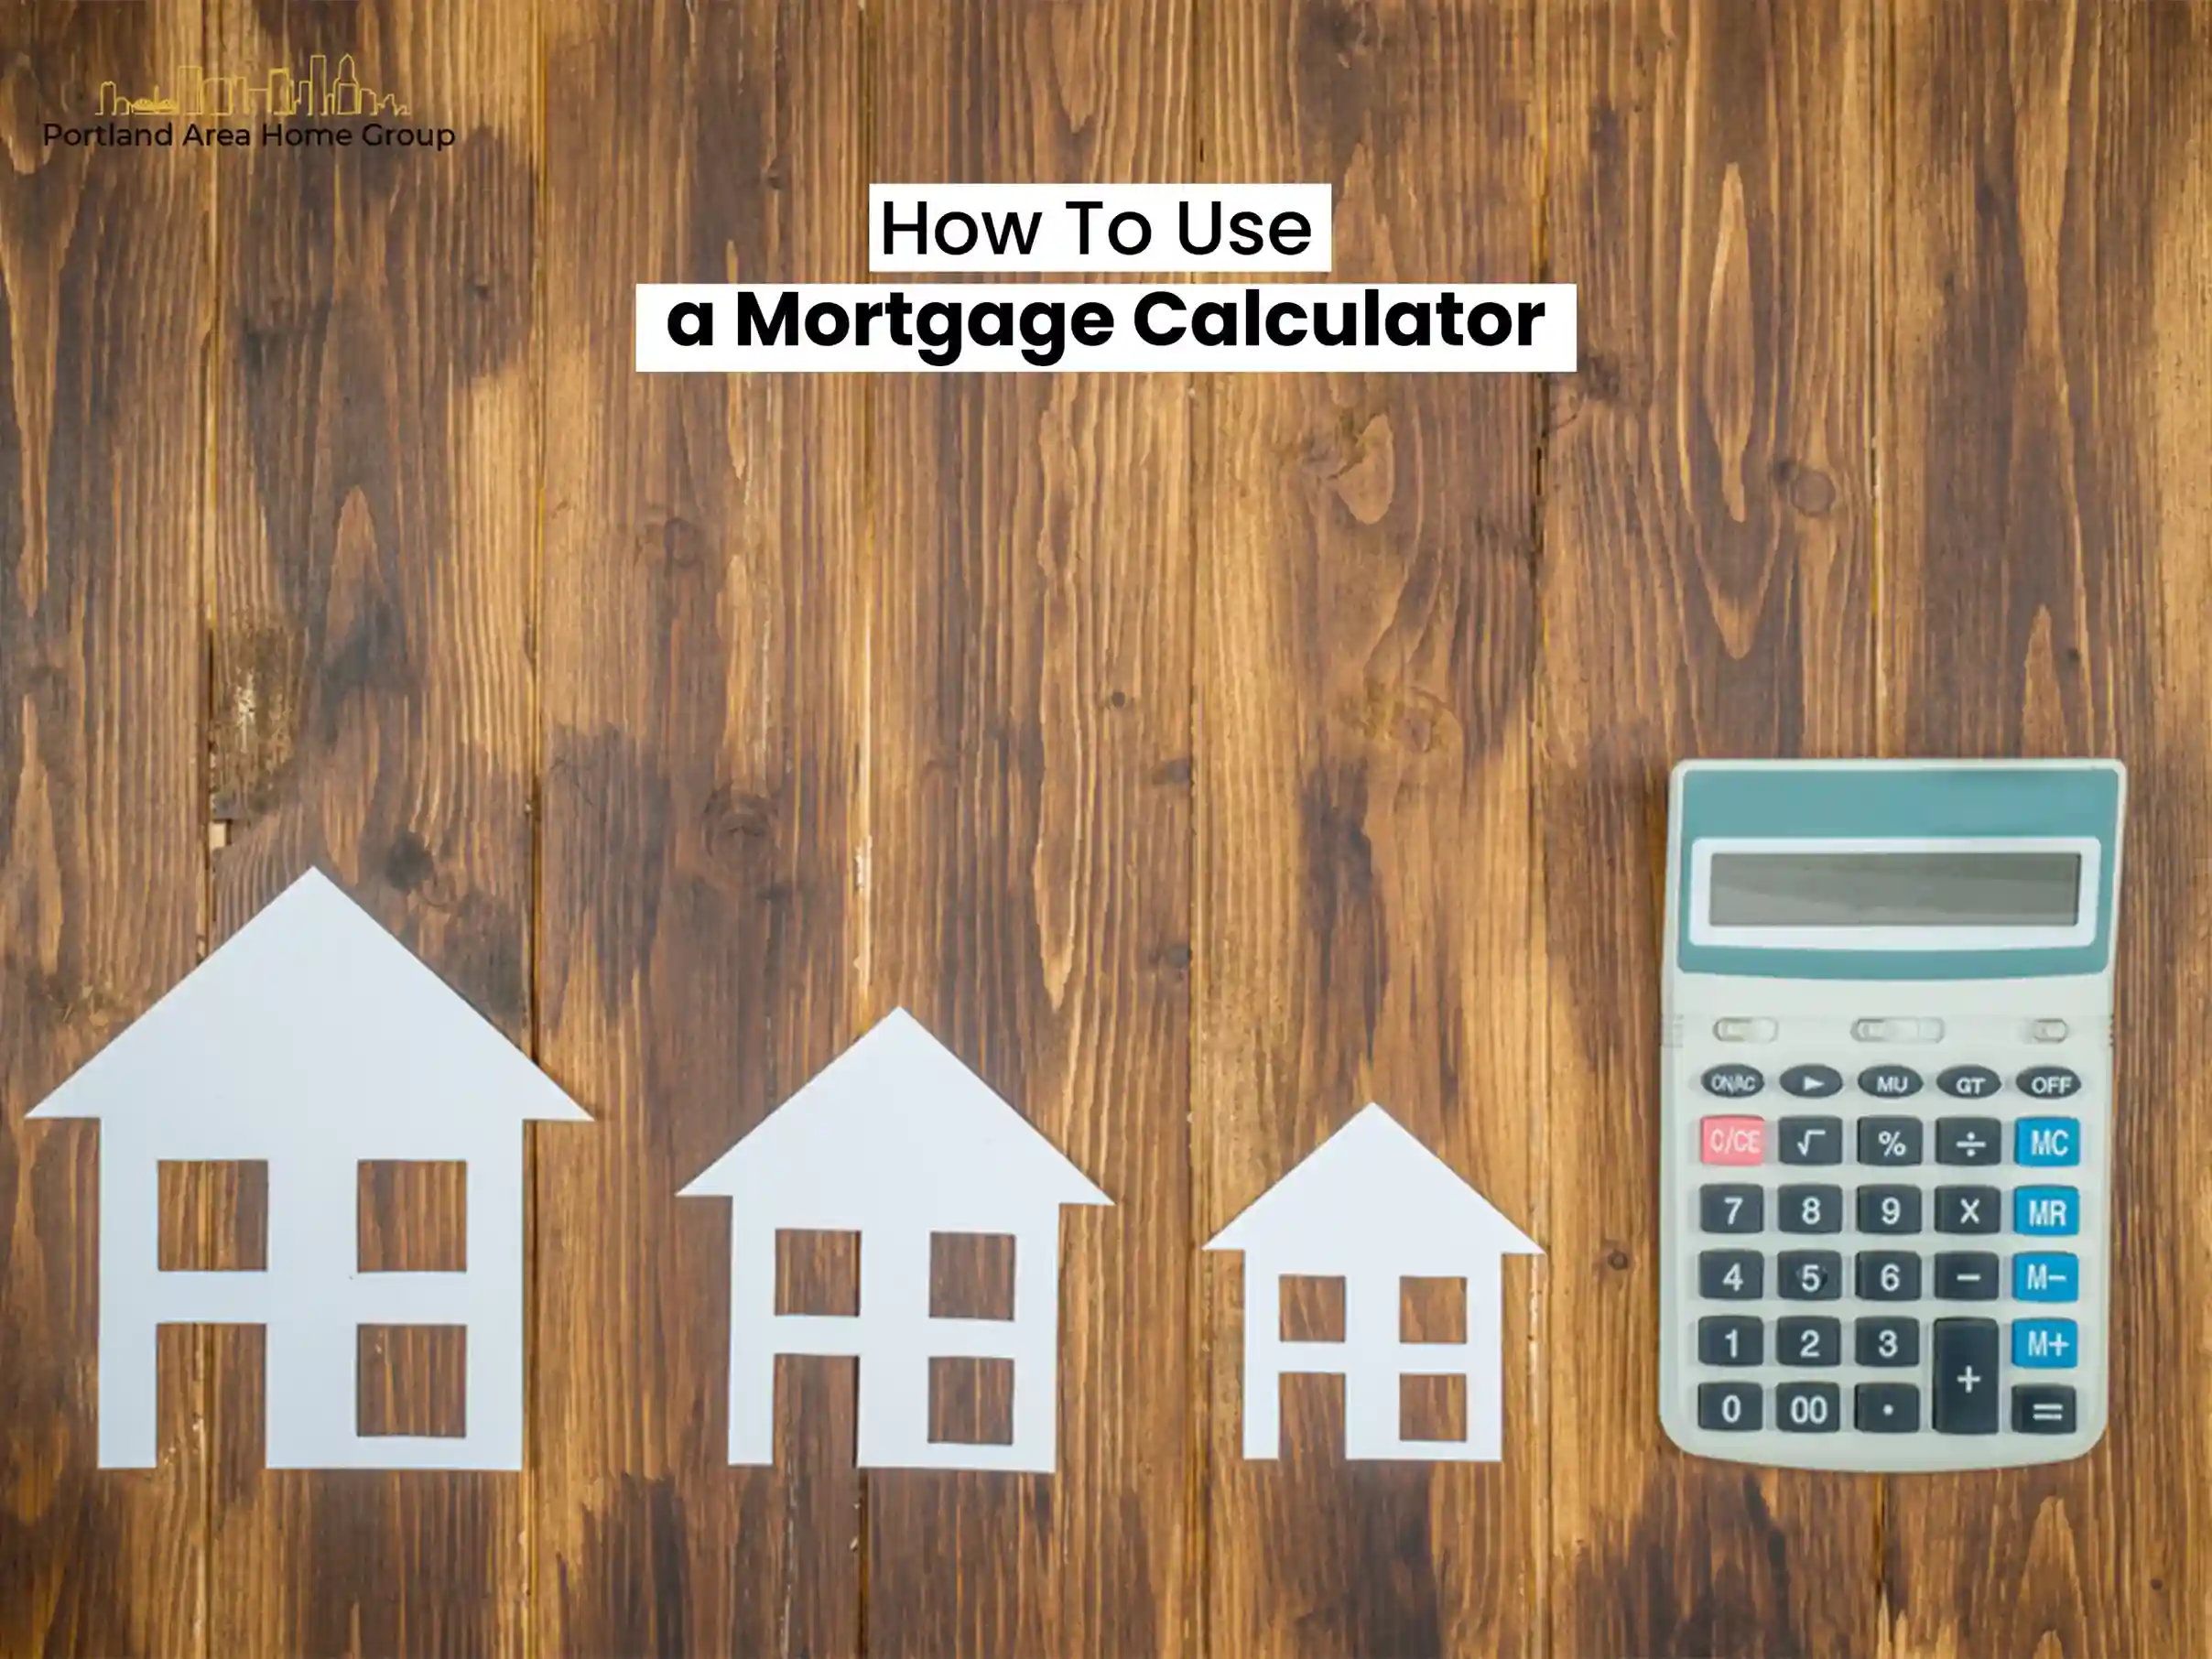 How To Use a Mortgage Calculator